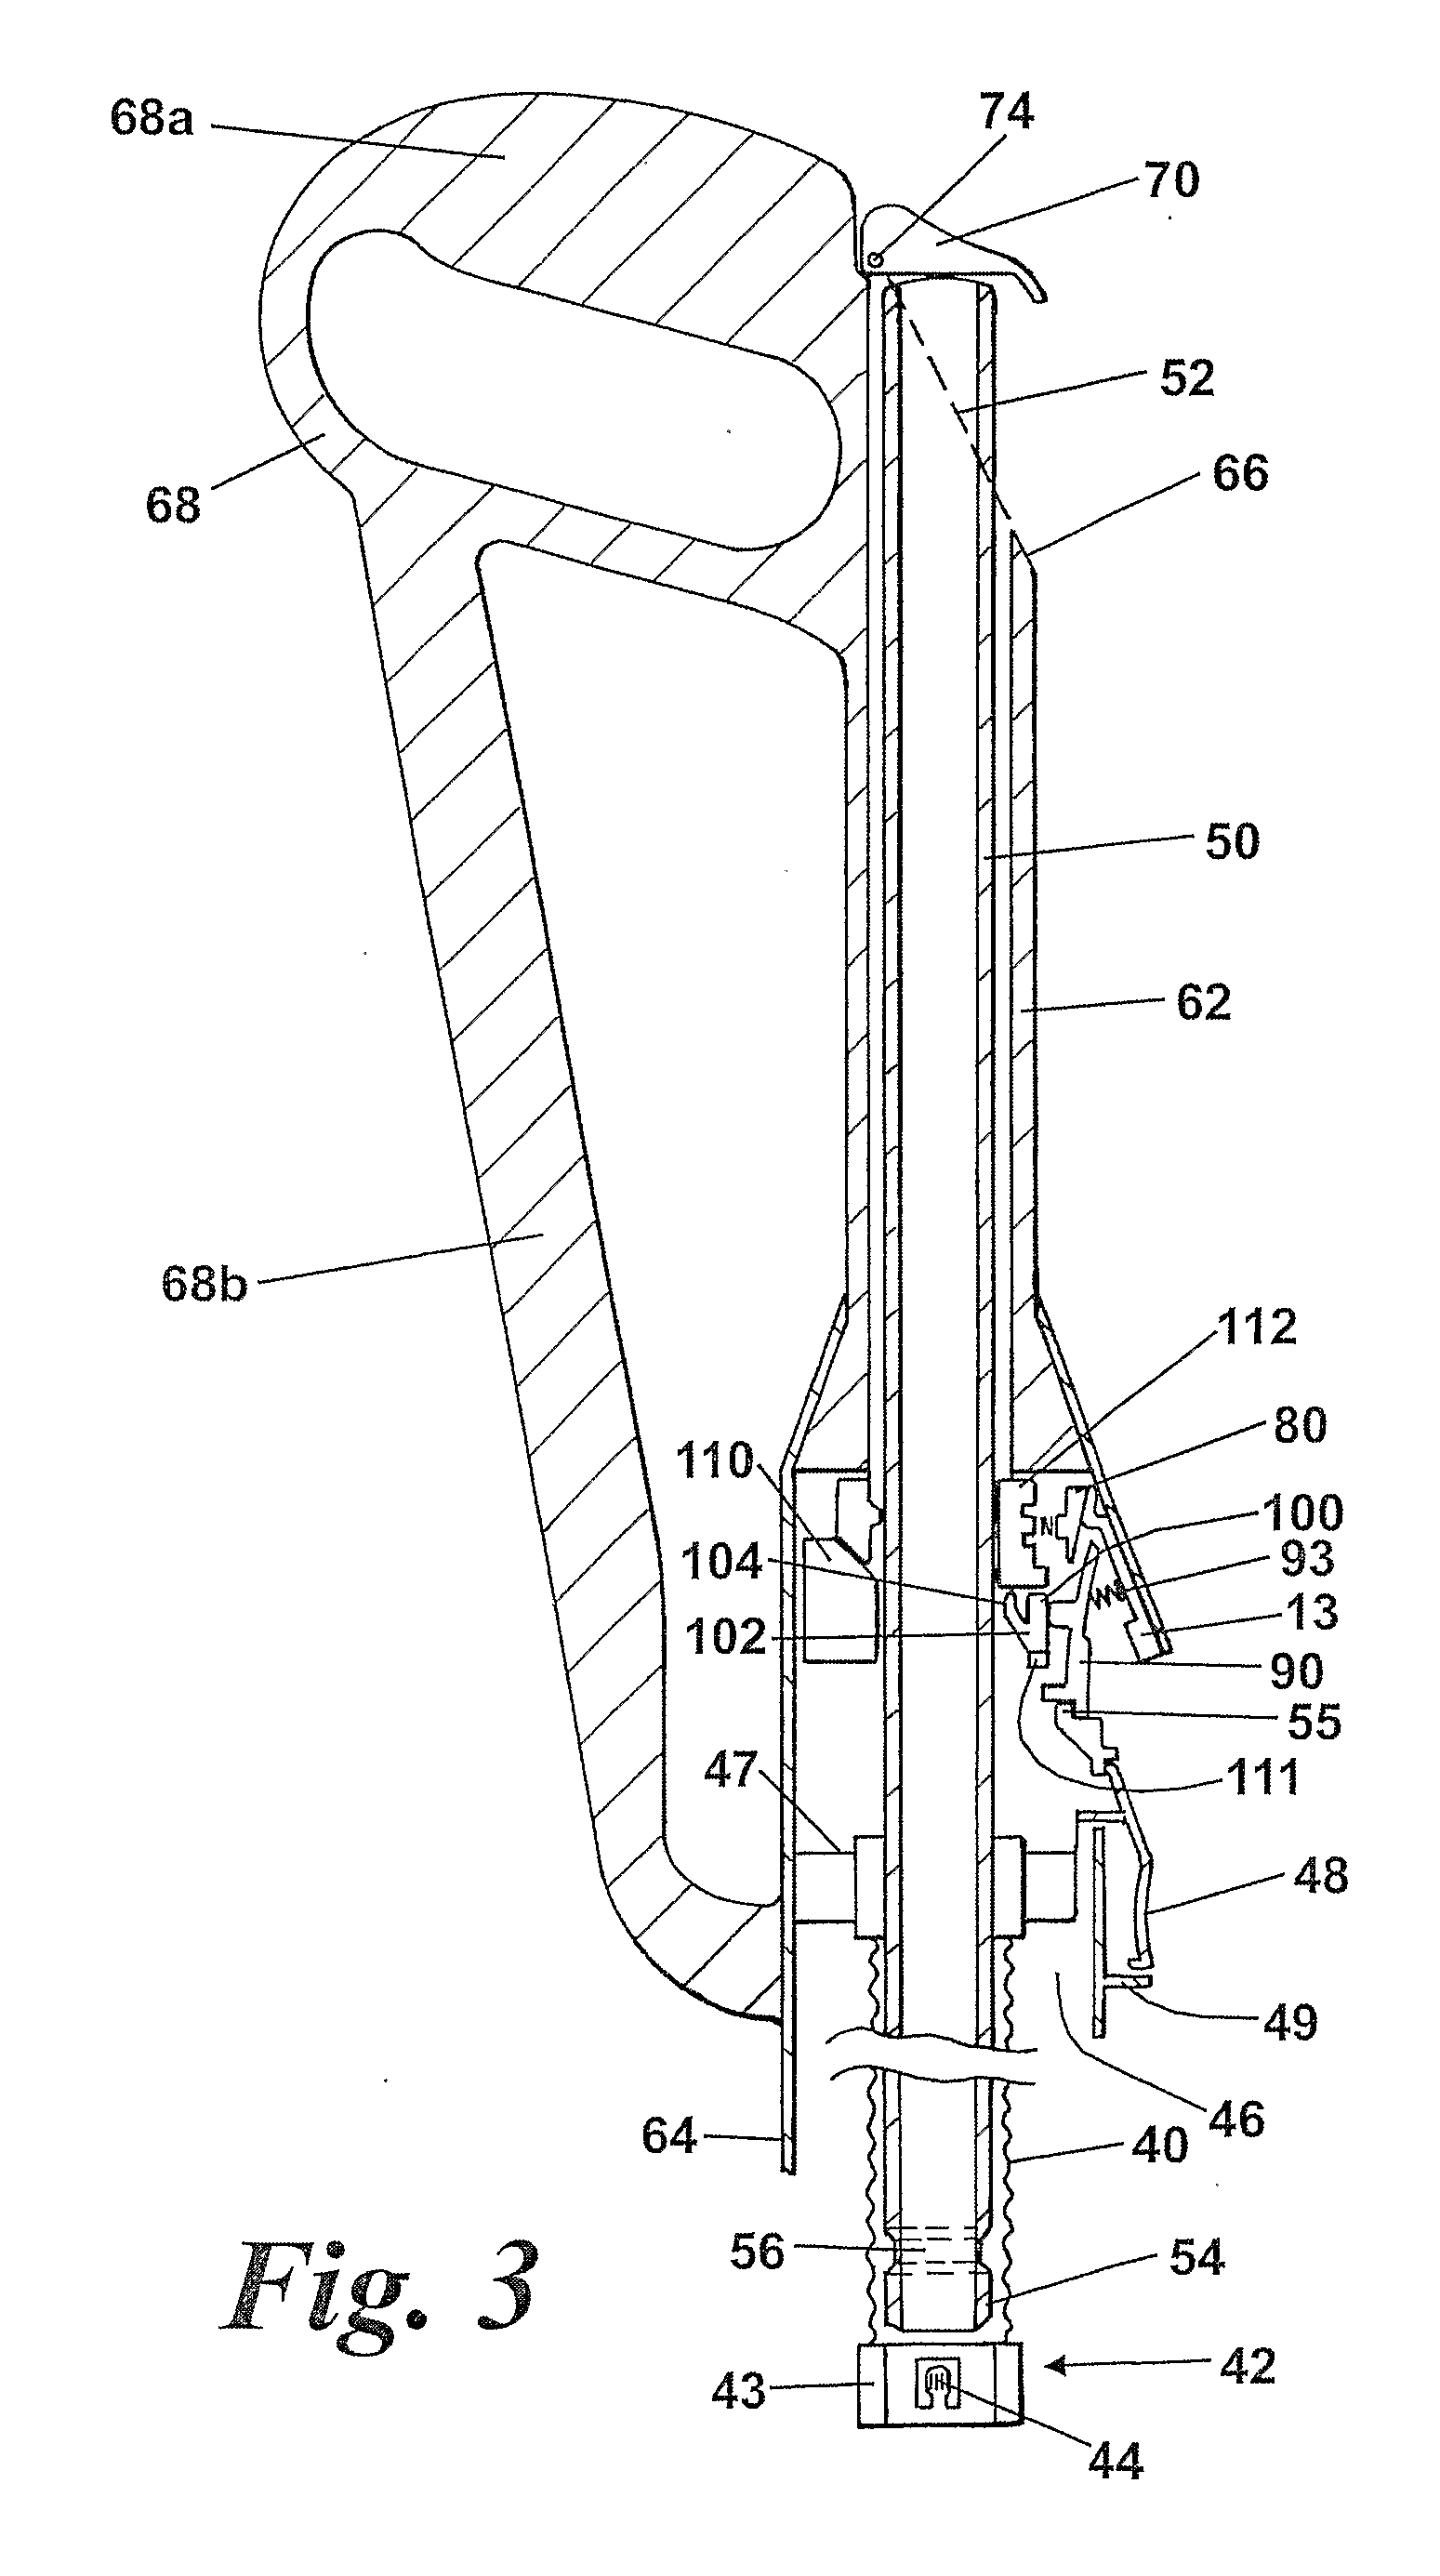 Handle assembly for a cleaning appliance